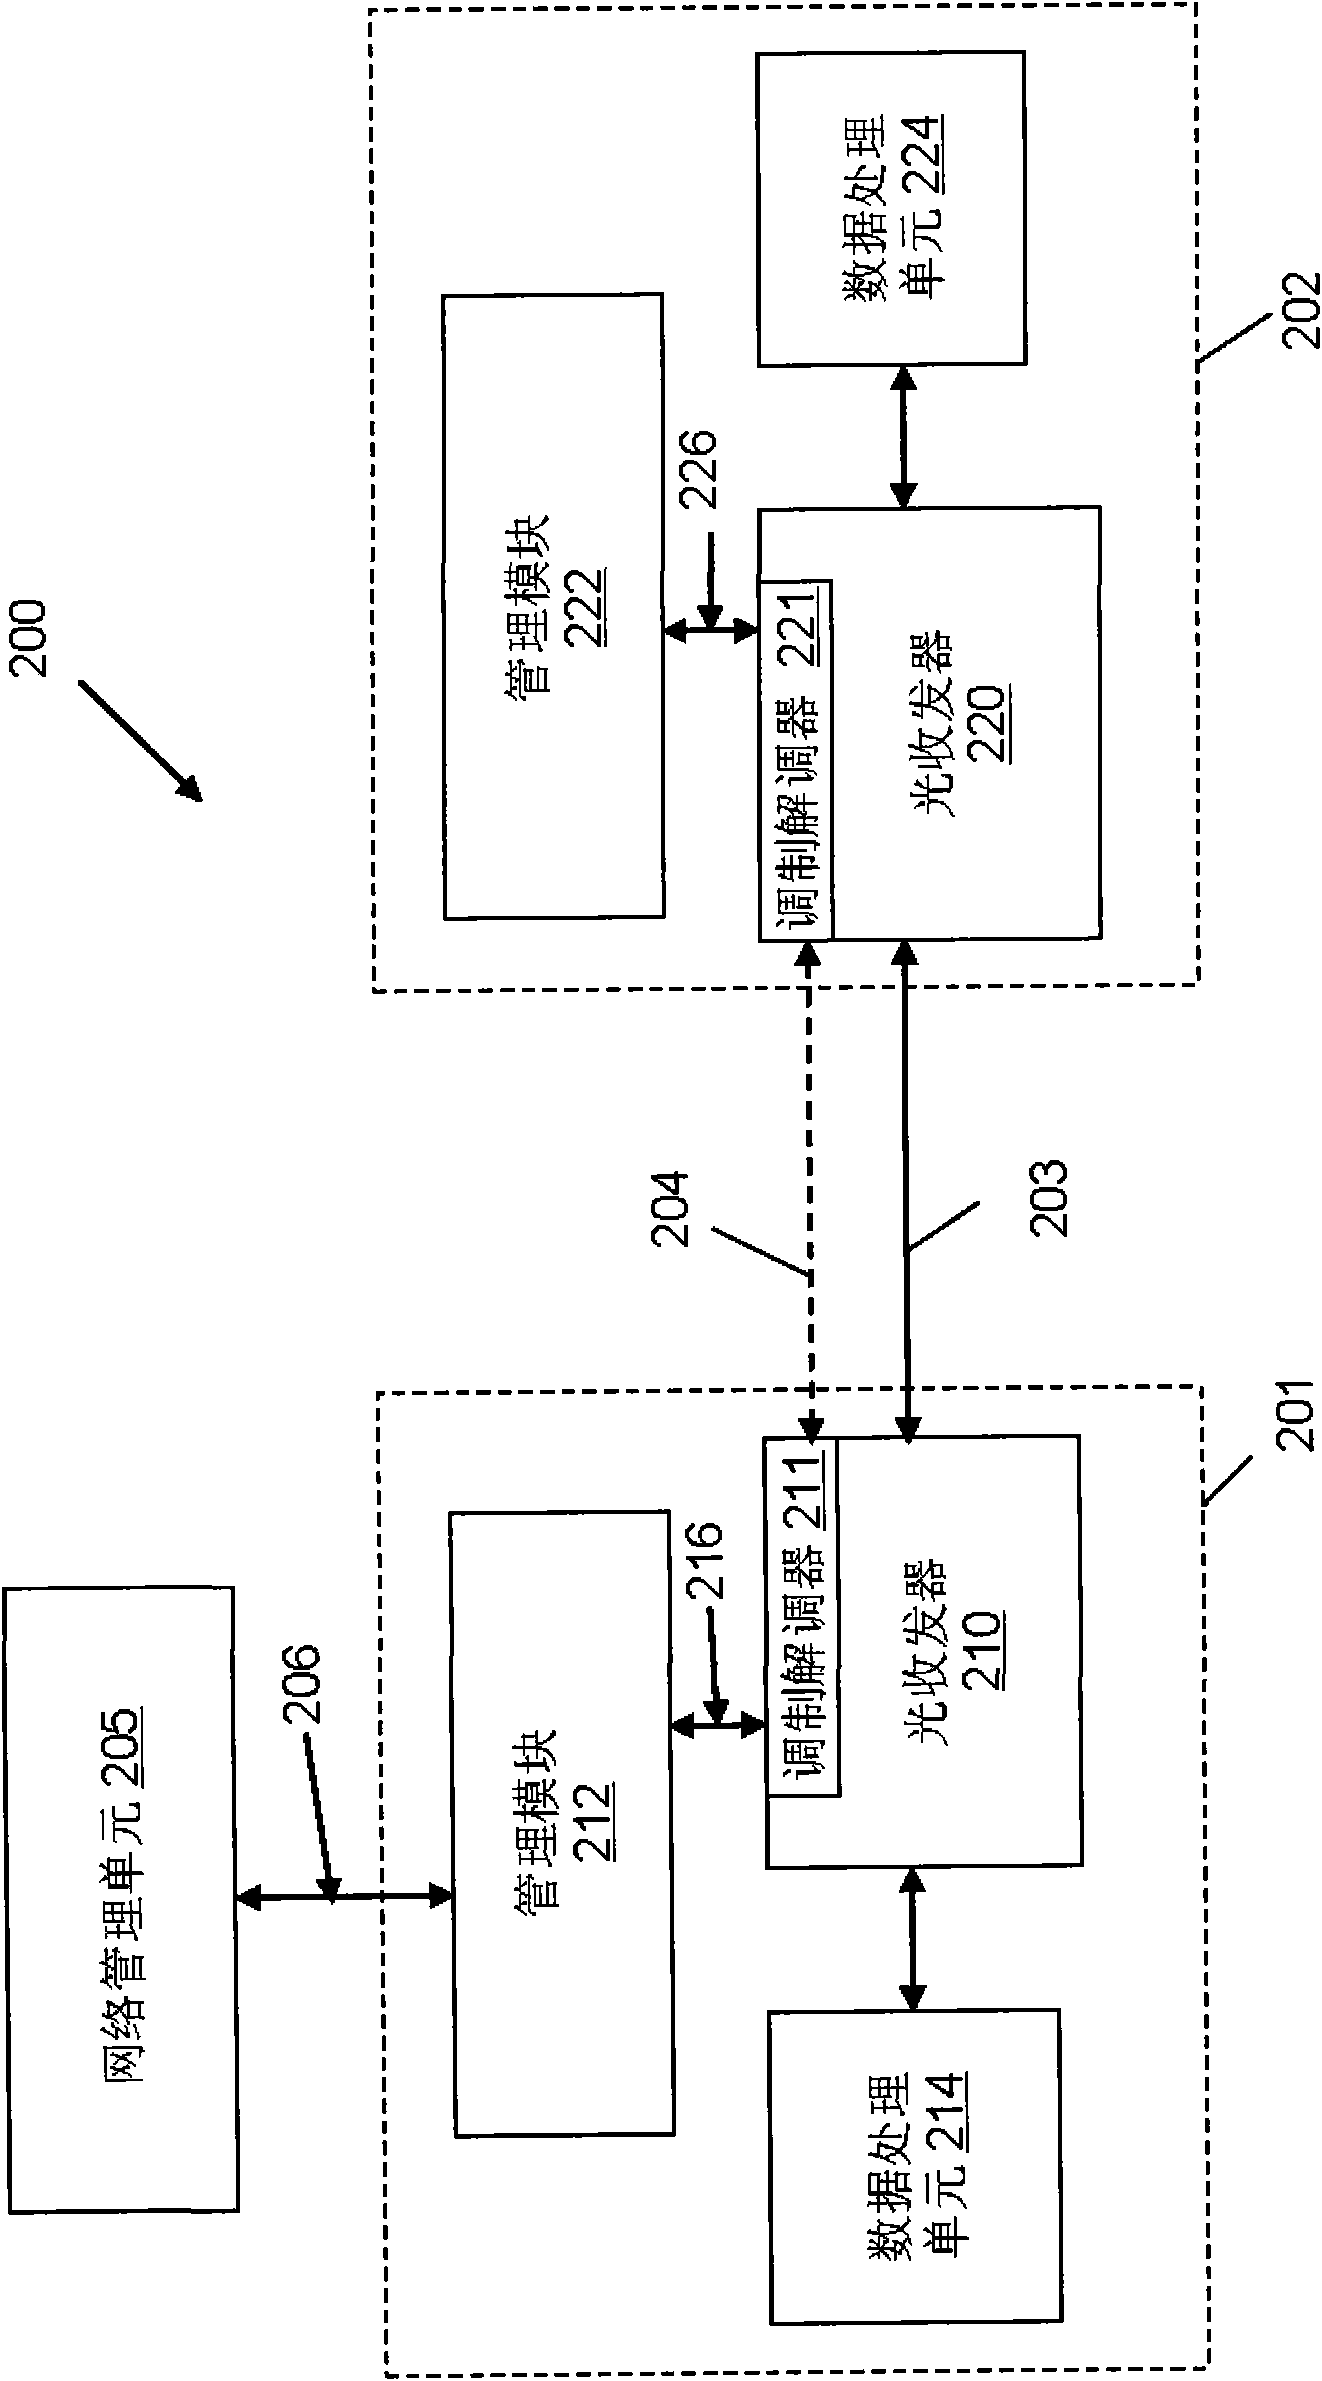 Integrated optical transceiver and optical communication system and method